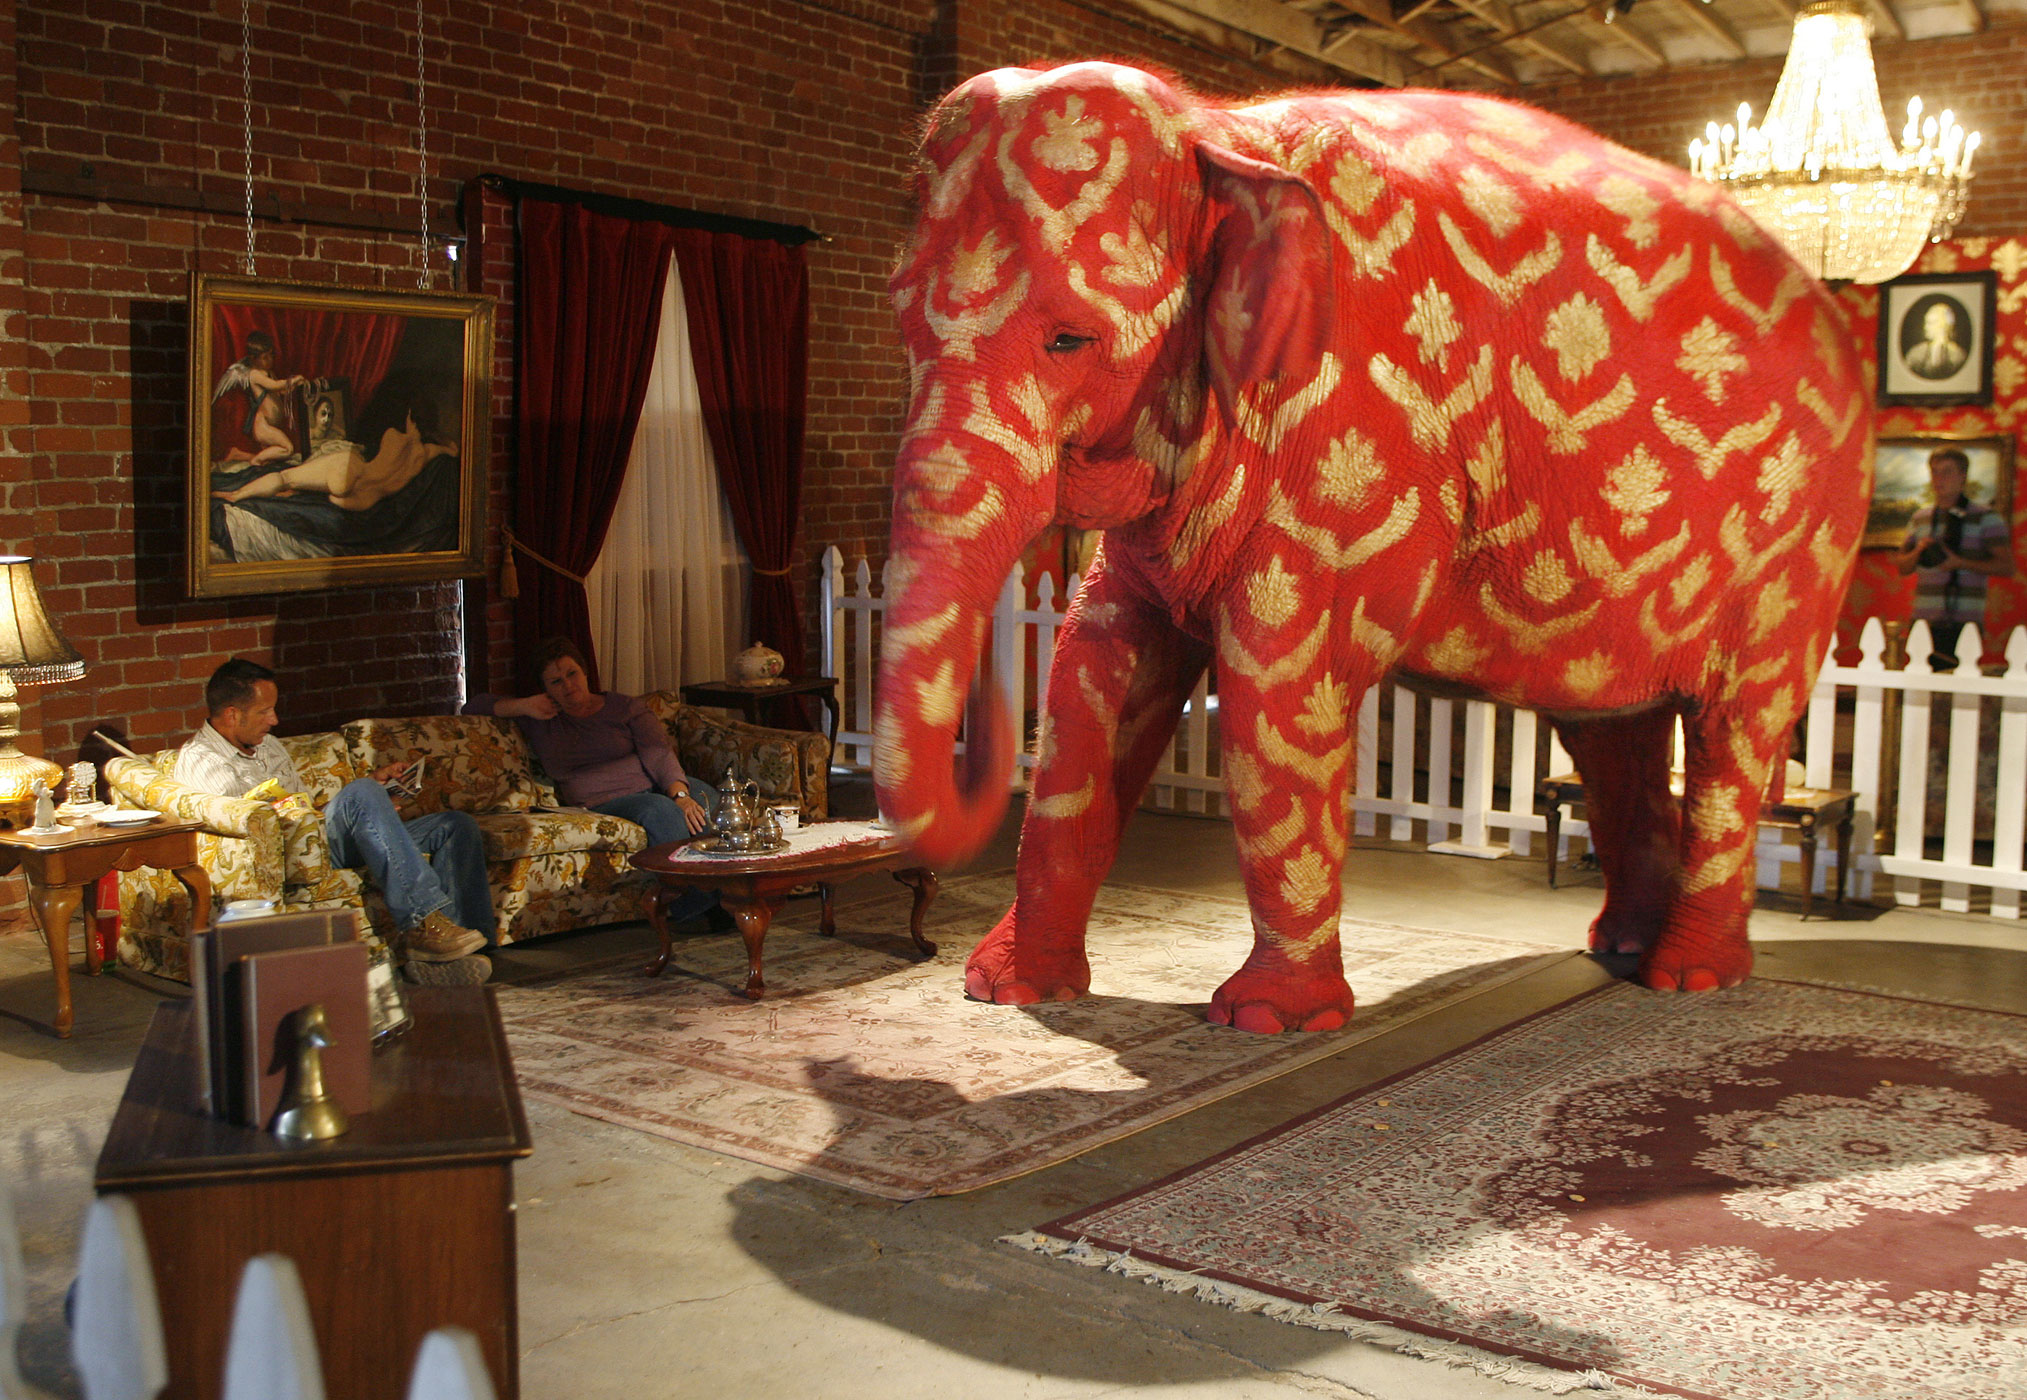 Asian elephant, painted by British underground artist Banksy, is displayed at "Barely Legal" exhibition in Los Angeles